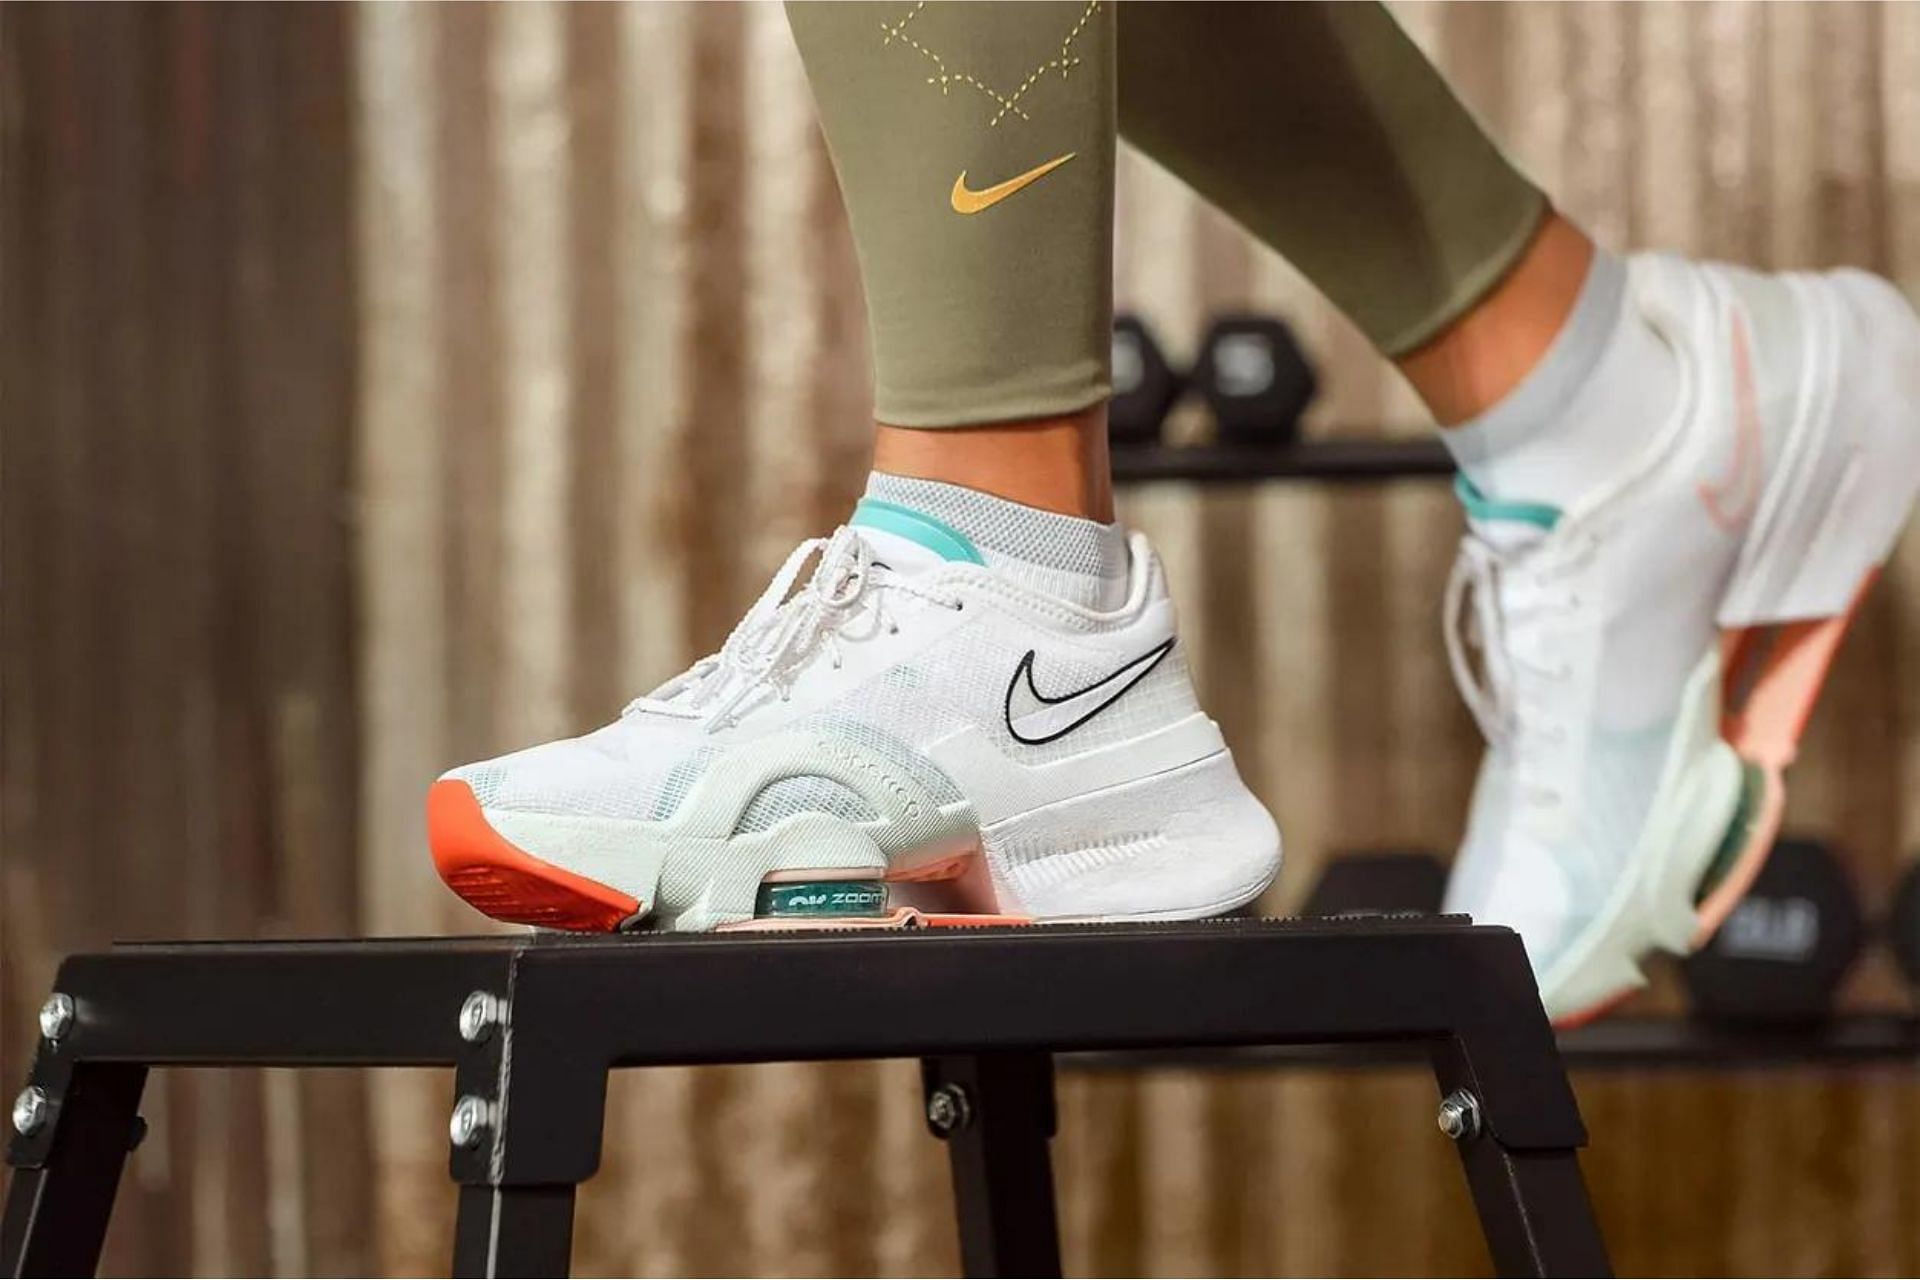 How to pick gym shoes according to the type of exercise (Image via Nike)